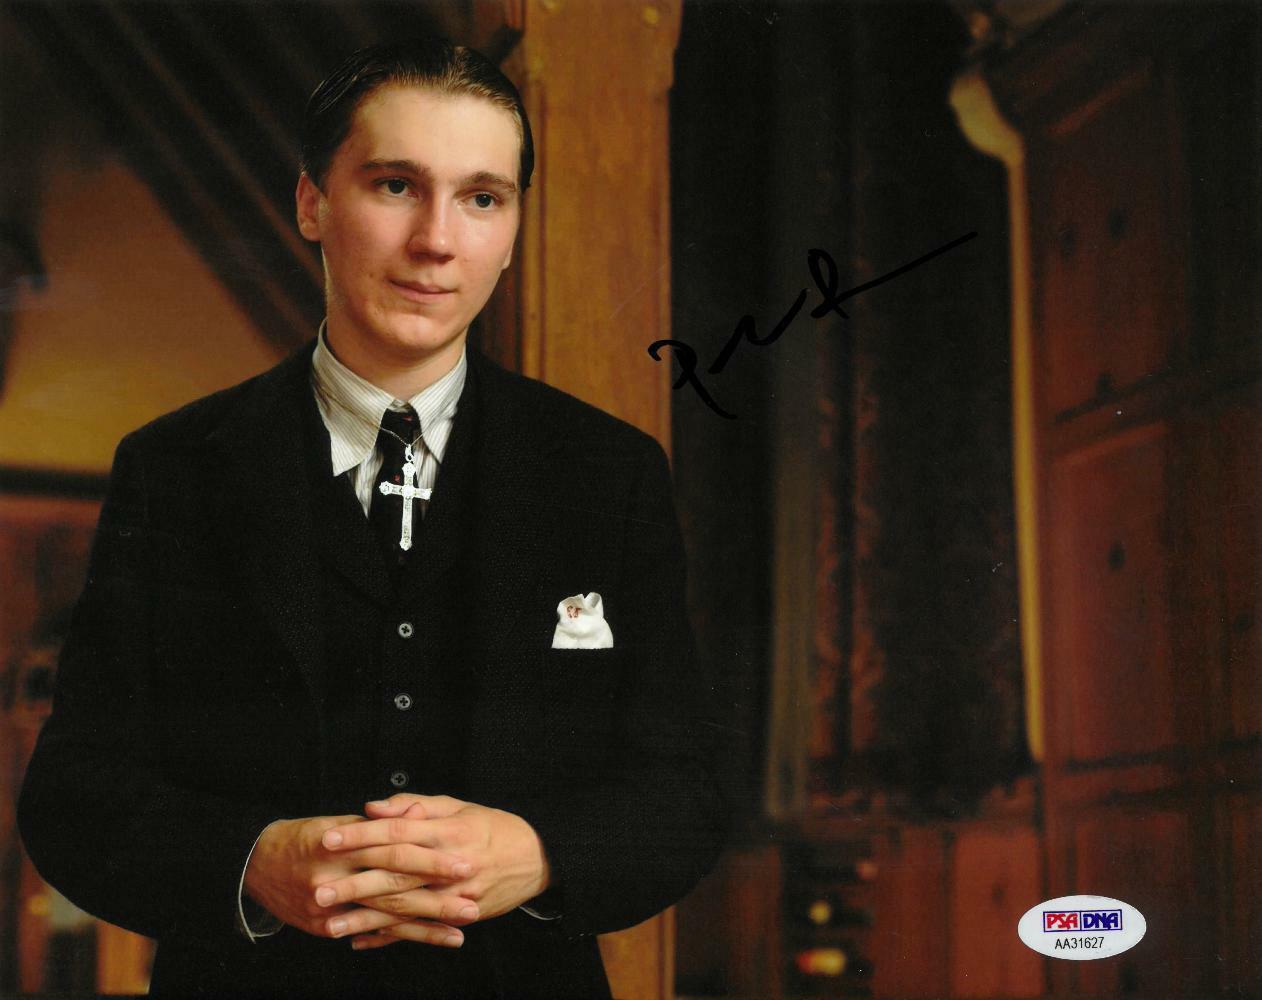 Paul Dano Signed There Will Be Blood Autographed 8x10 Photo Poster painting PSA/DNA #AA31627